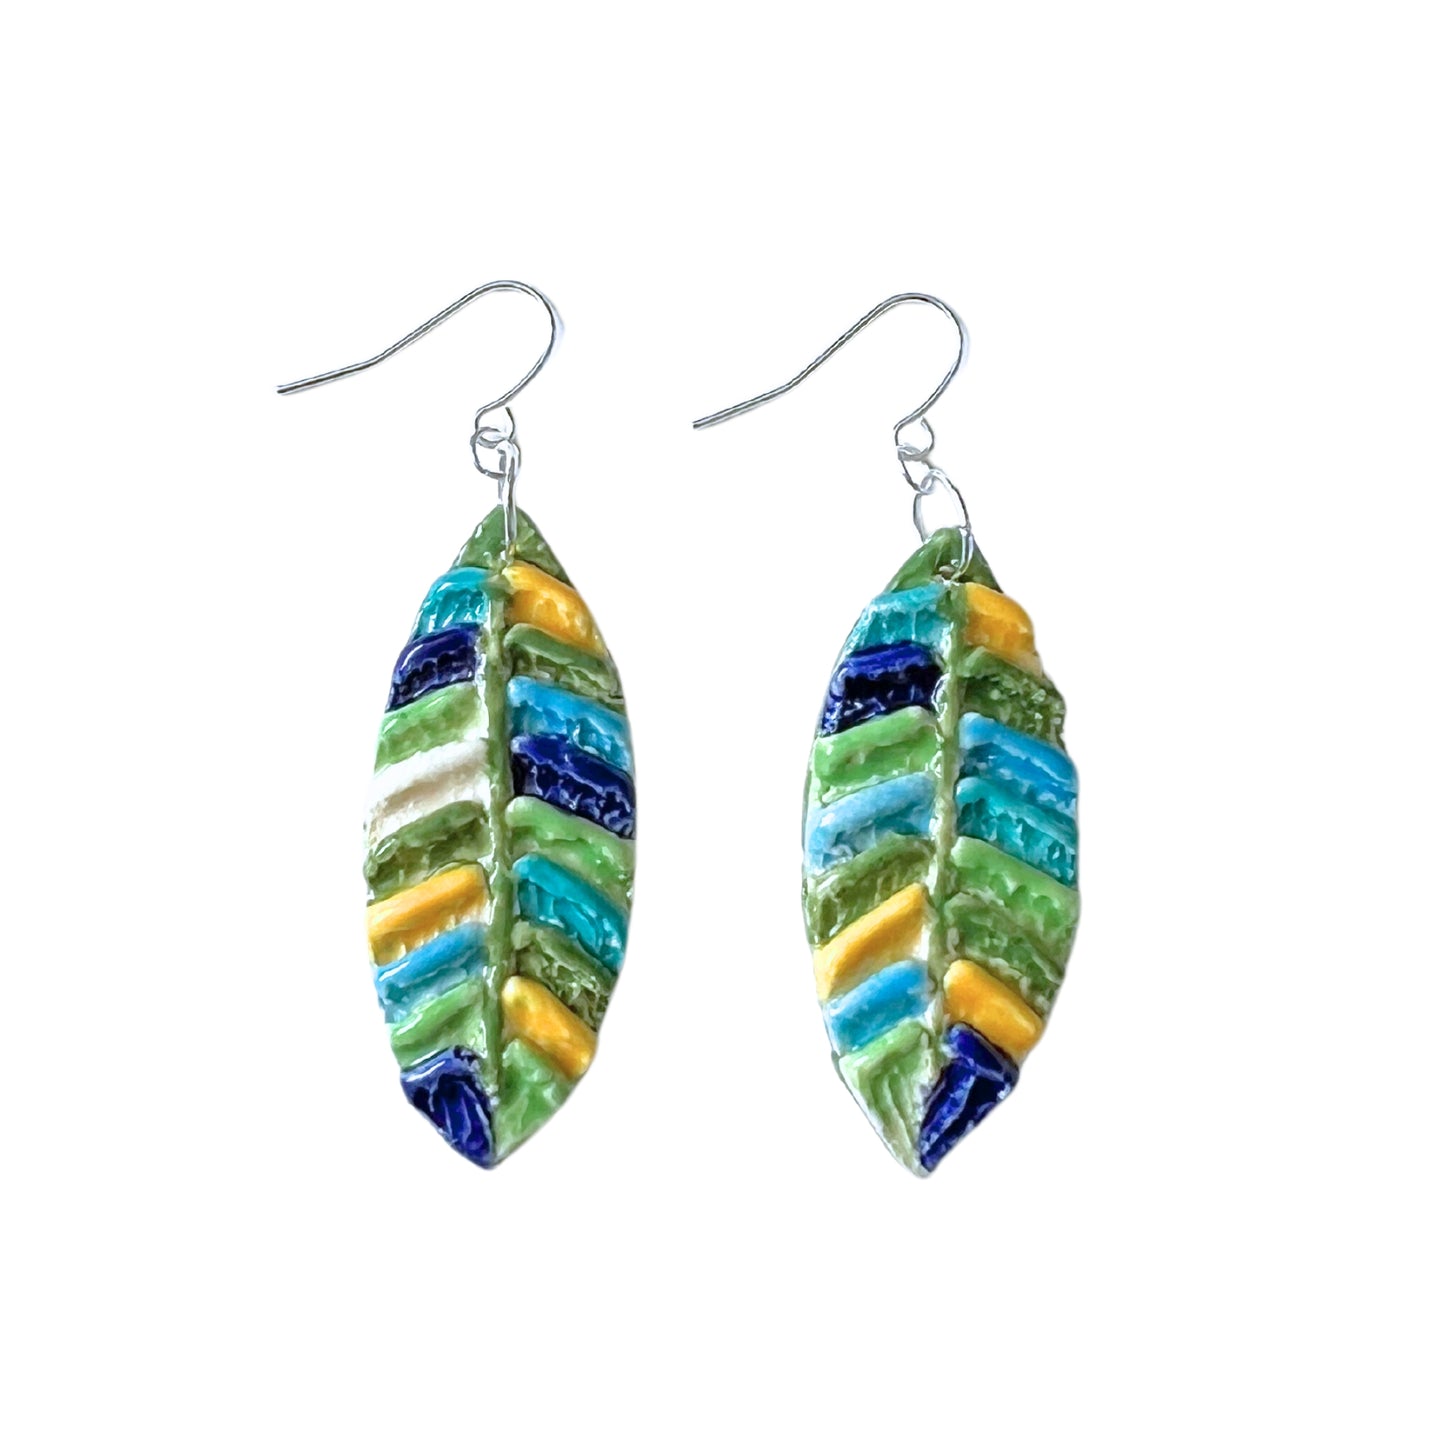 Captivating Leaf Earrings // Textured